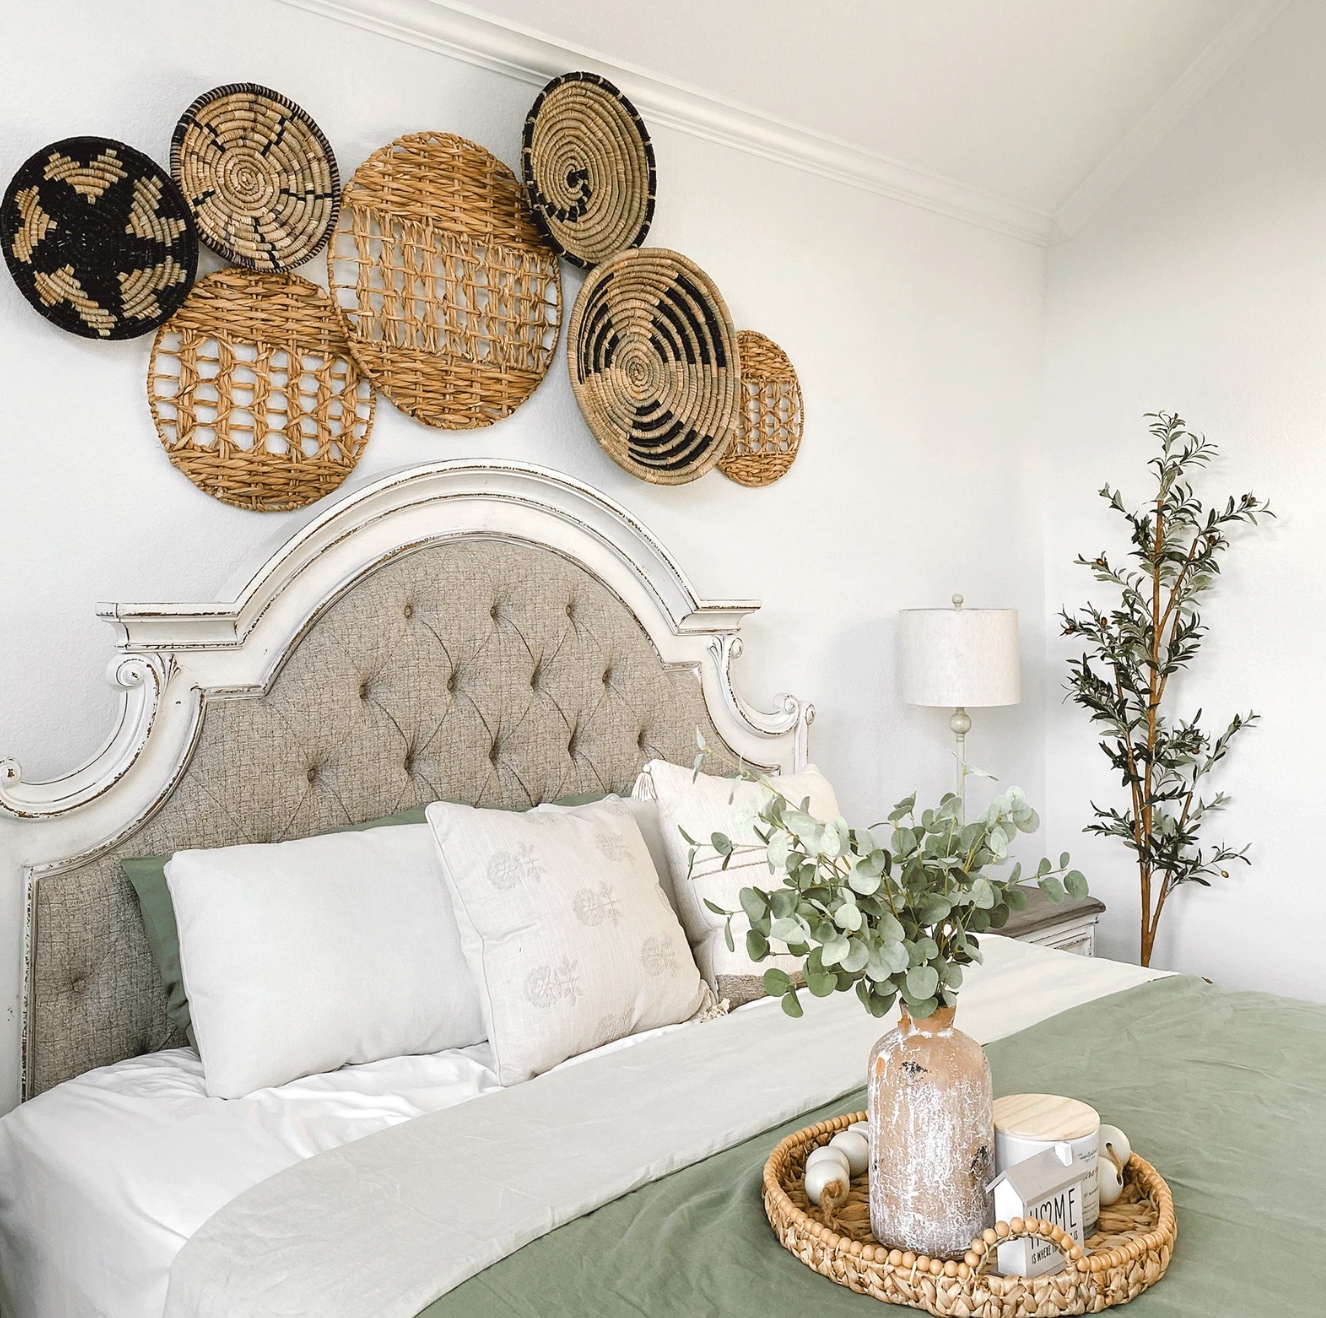 Etsy Wall Decor Ideas baskets hanging over bed with green spread